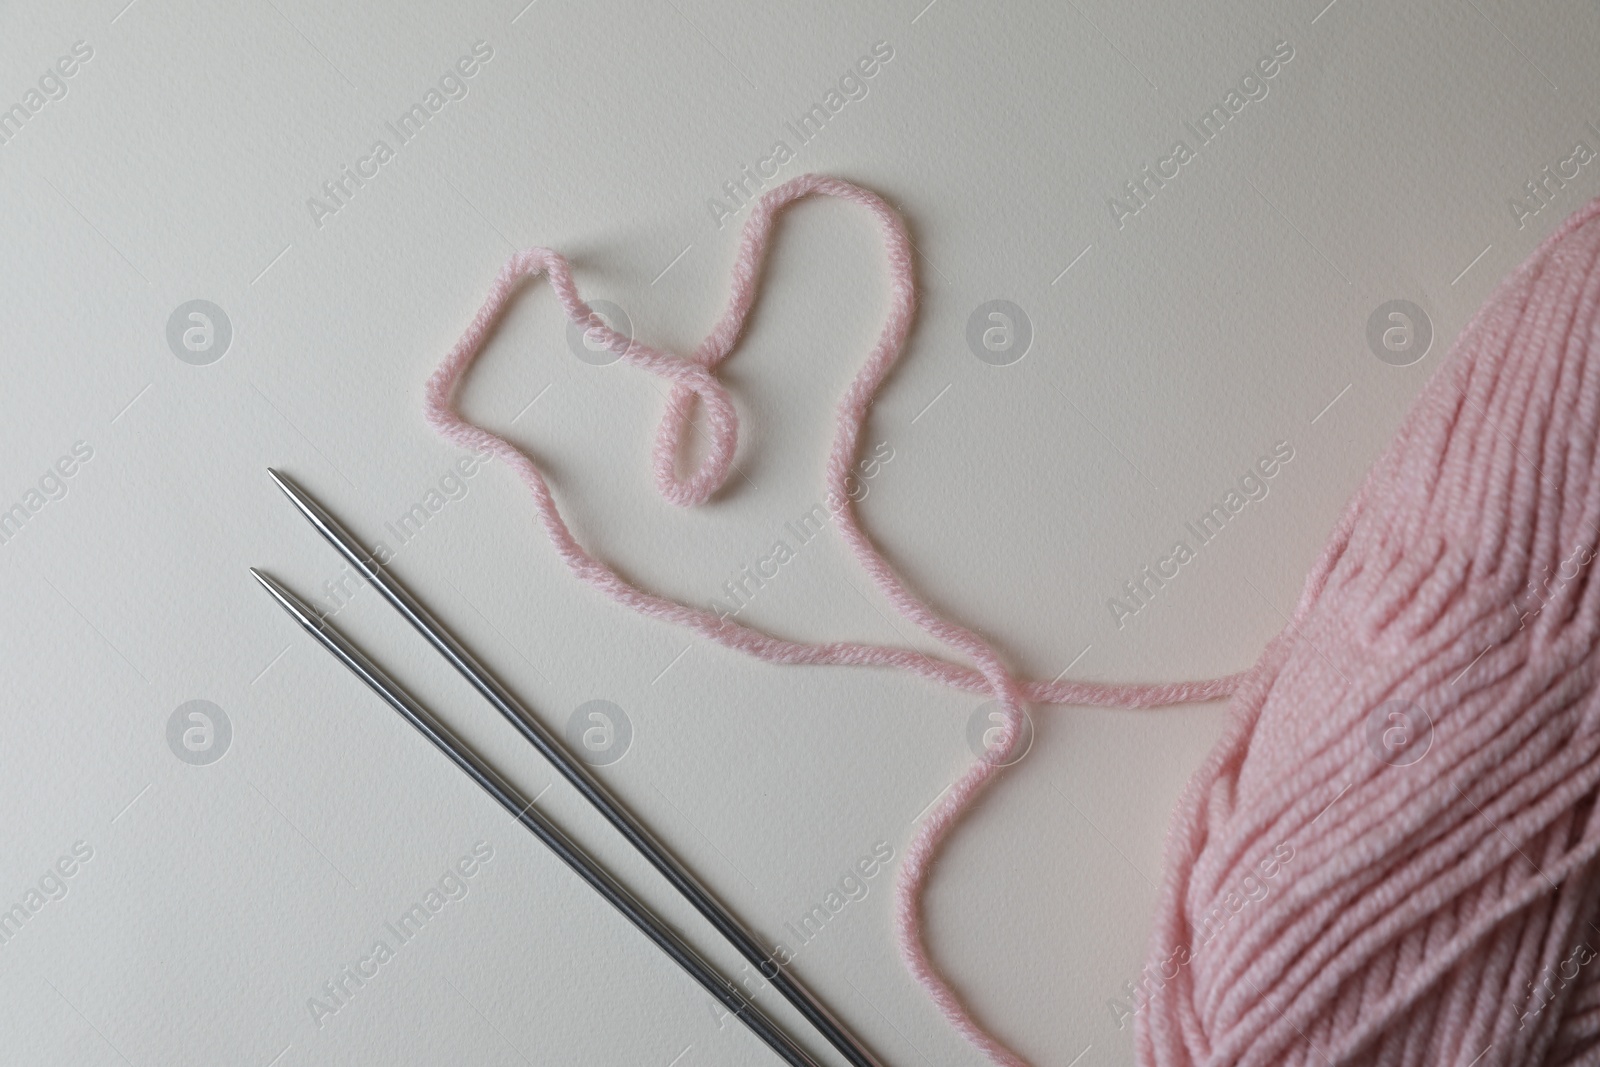 Photo of Soft pink yarn and metal knitting needles on light background, top view